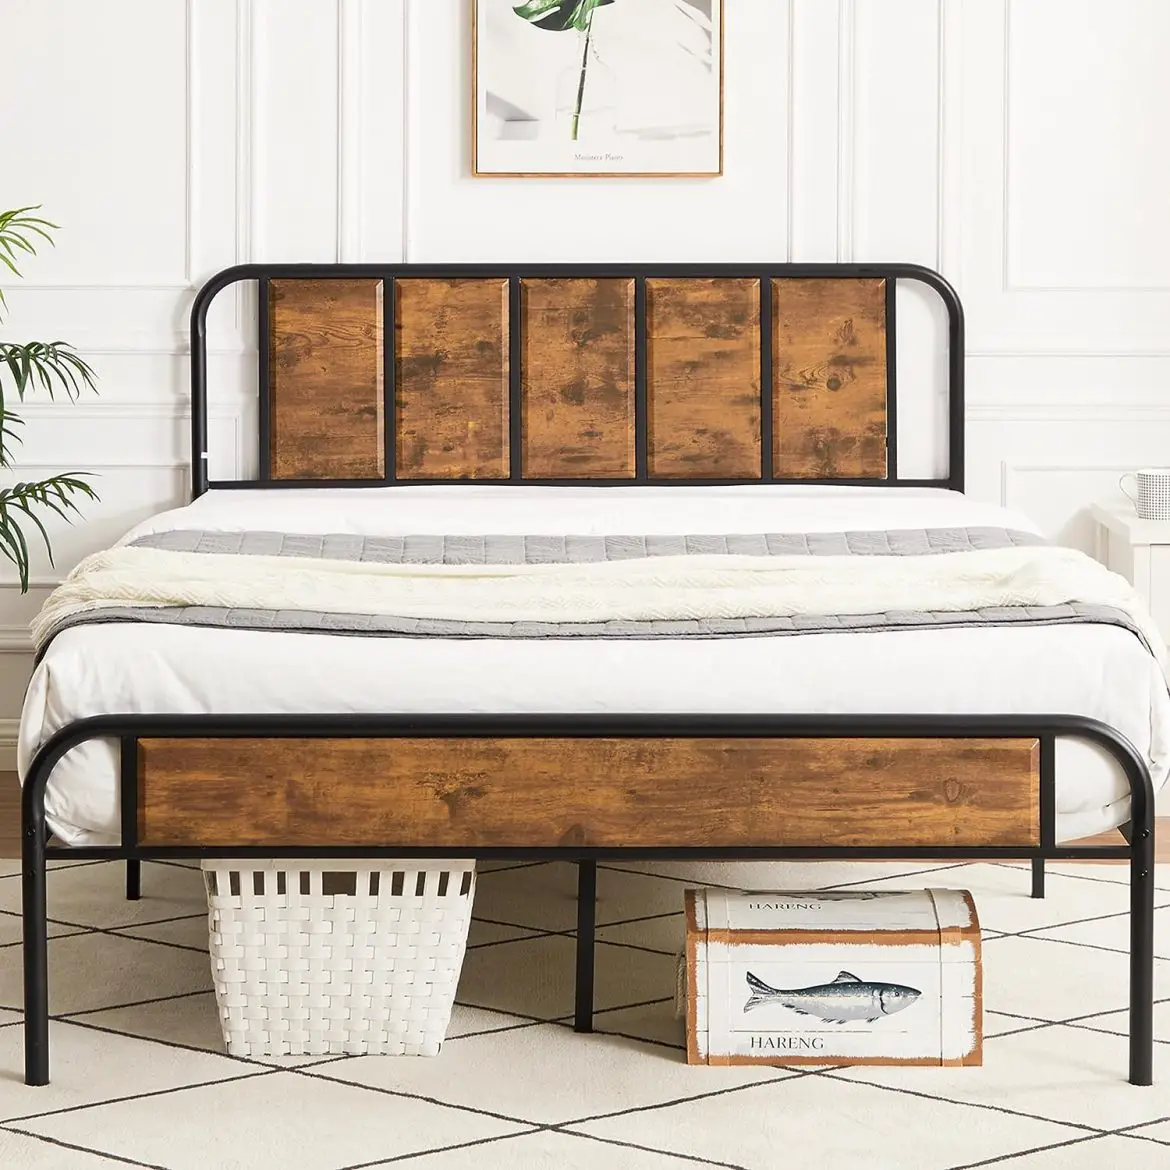 14 Amazon Bed Frames with Headboards for Industrial Chic – SOAPLAKE'S